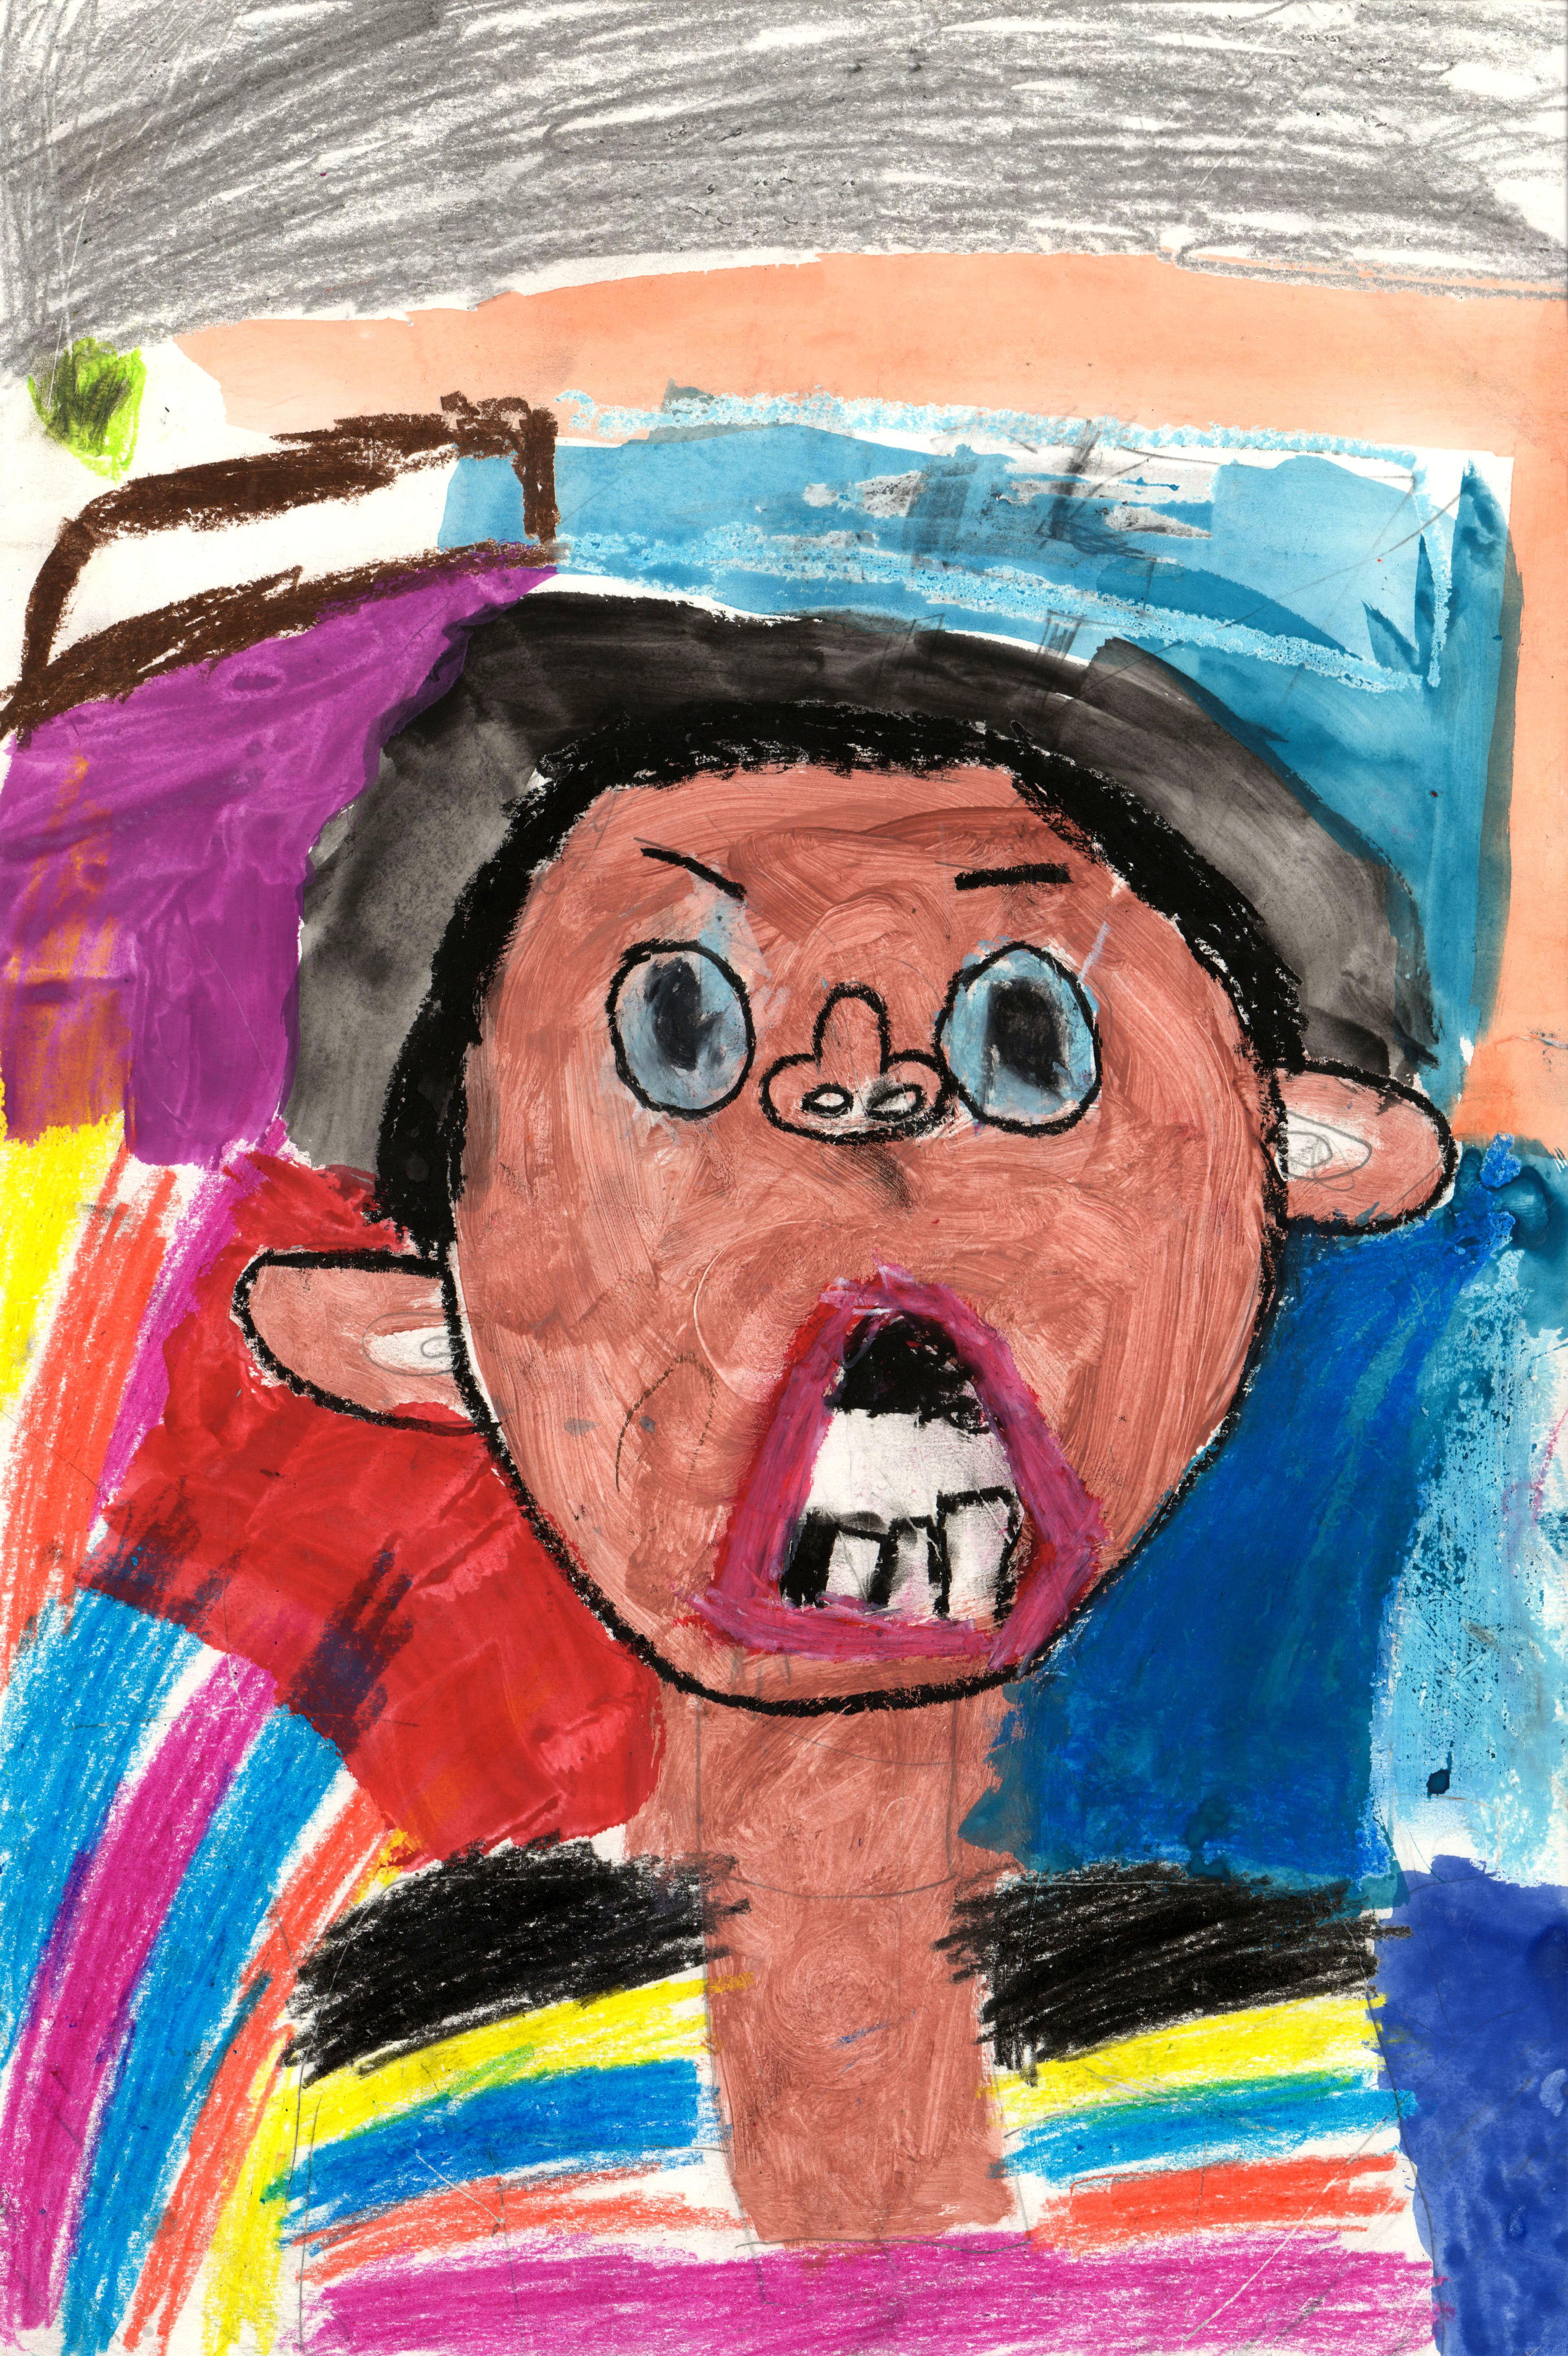 Mixed-media self-portrait of a young boy with light brown skin facing the viewer. He has thick black hair. His mouth is open and he has an open-mouthed, wide-eyed expression of shock on his face. His eyes are black with round blue irises, and thin black eyebrows. The left eyebrow is slightly downward. He wears a shirt with horizontal stripes colored black, yellow, blue, orange, and violet from top to bottom. The background behind him is awash in red to the left, blue to the right, violet and cyan above his head, with a light orange horizontal bar above and black pencil crosshatching at the very top. To his lower left is a vertical pattern of stripes colored blue, violet, blue, and orange from left to right.